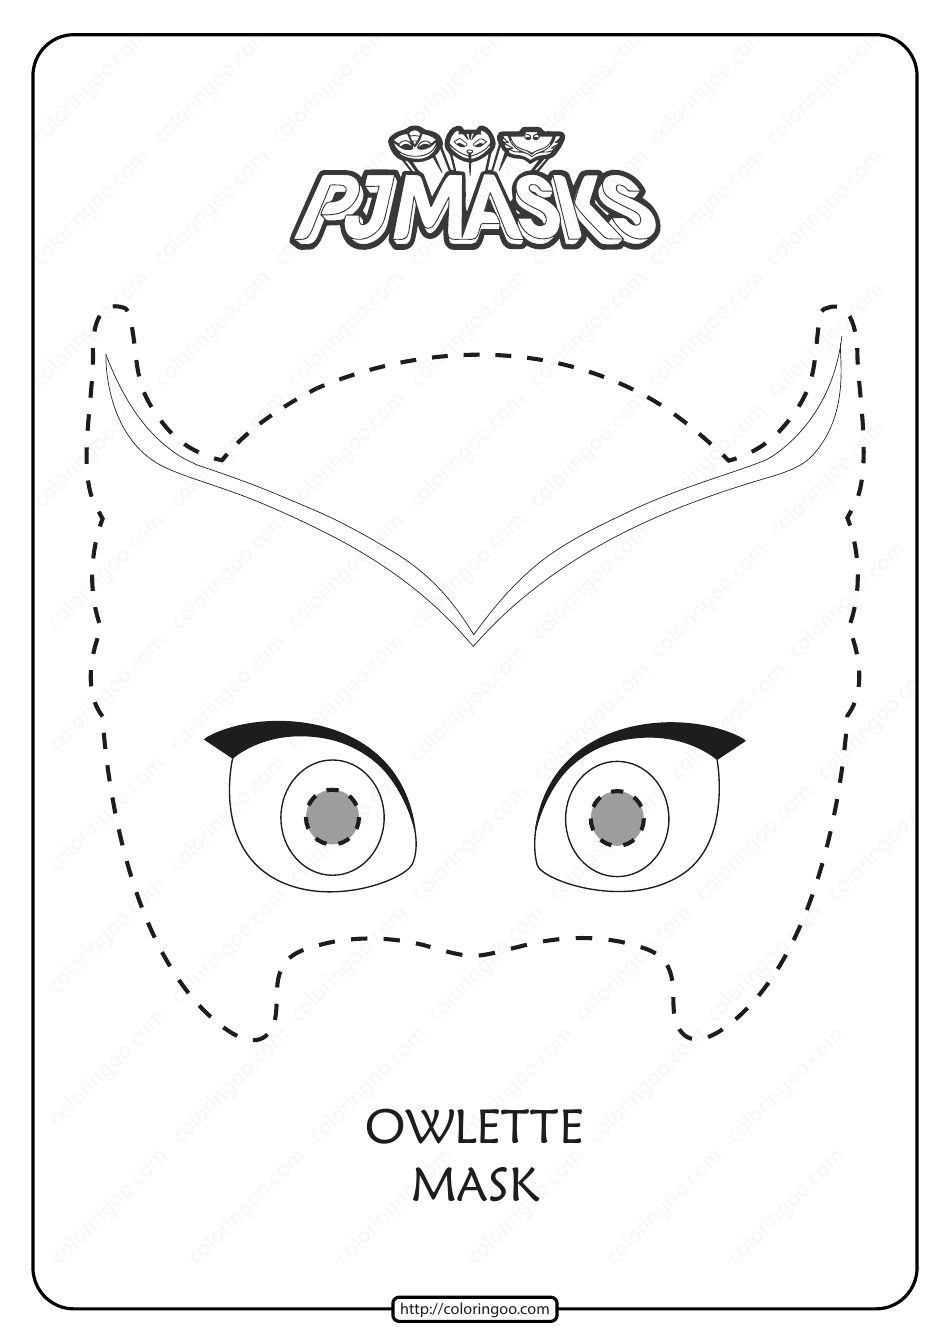 Owlette Mask Coloring Template, Page 1